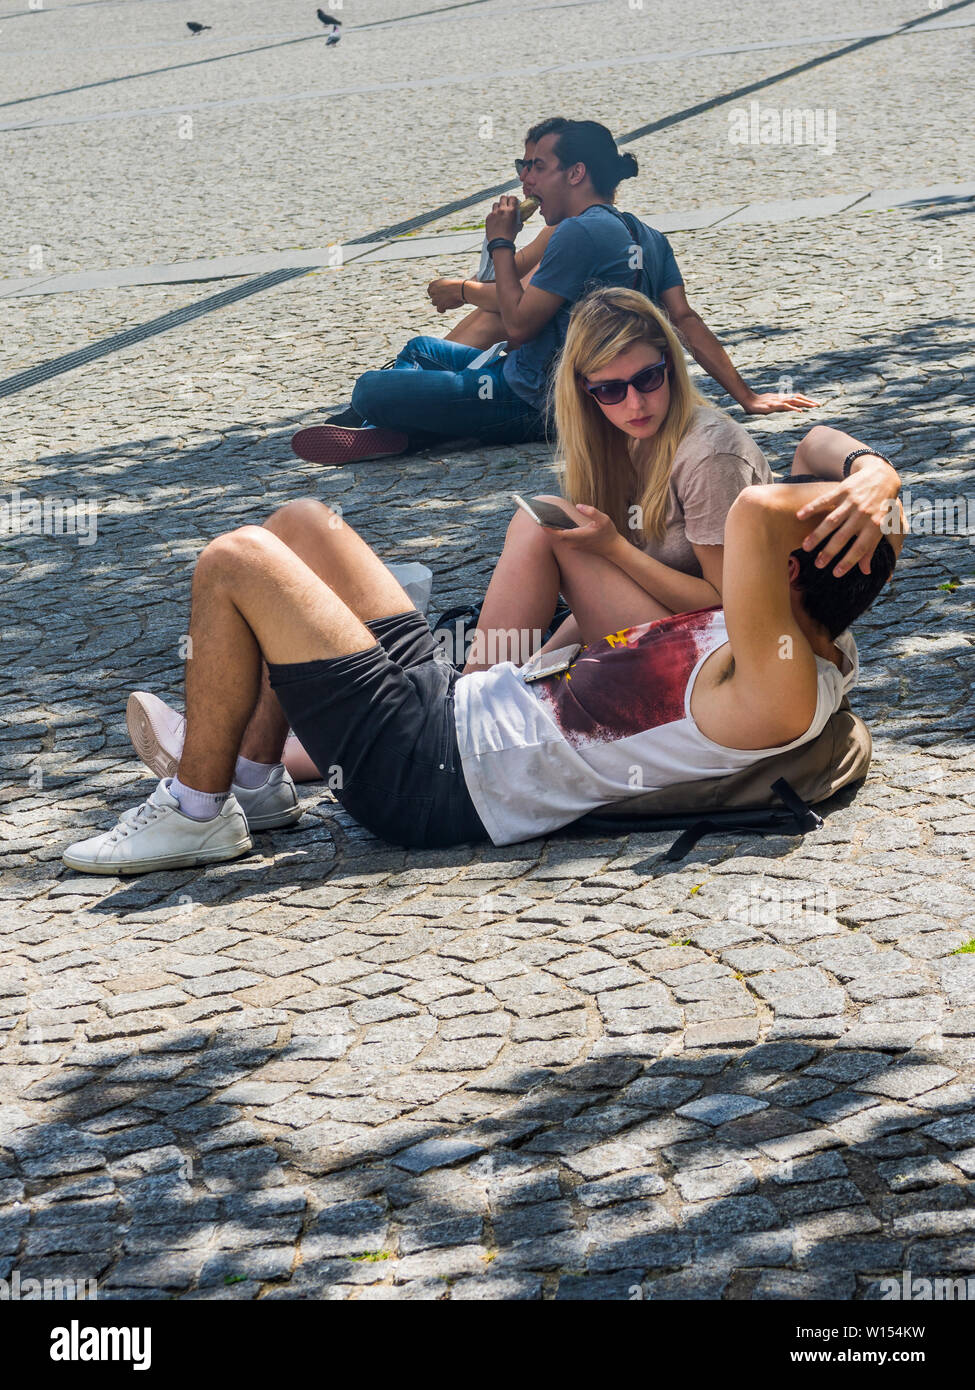 Couples interacting in a Parisian square, France. Stock Photo